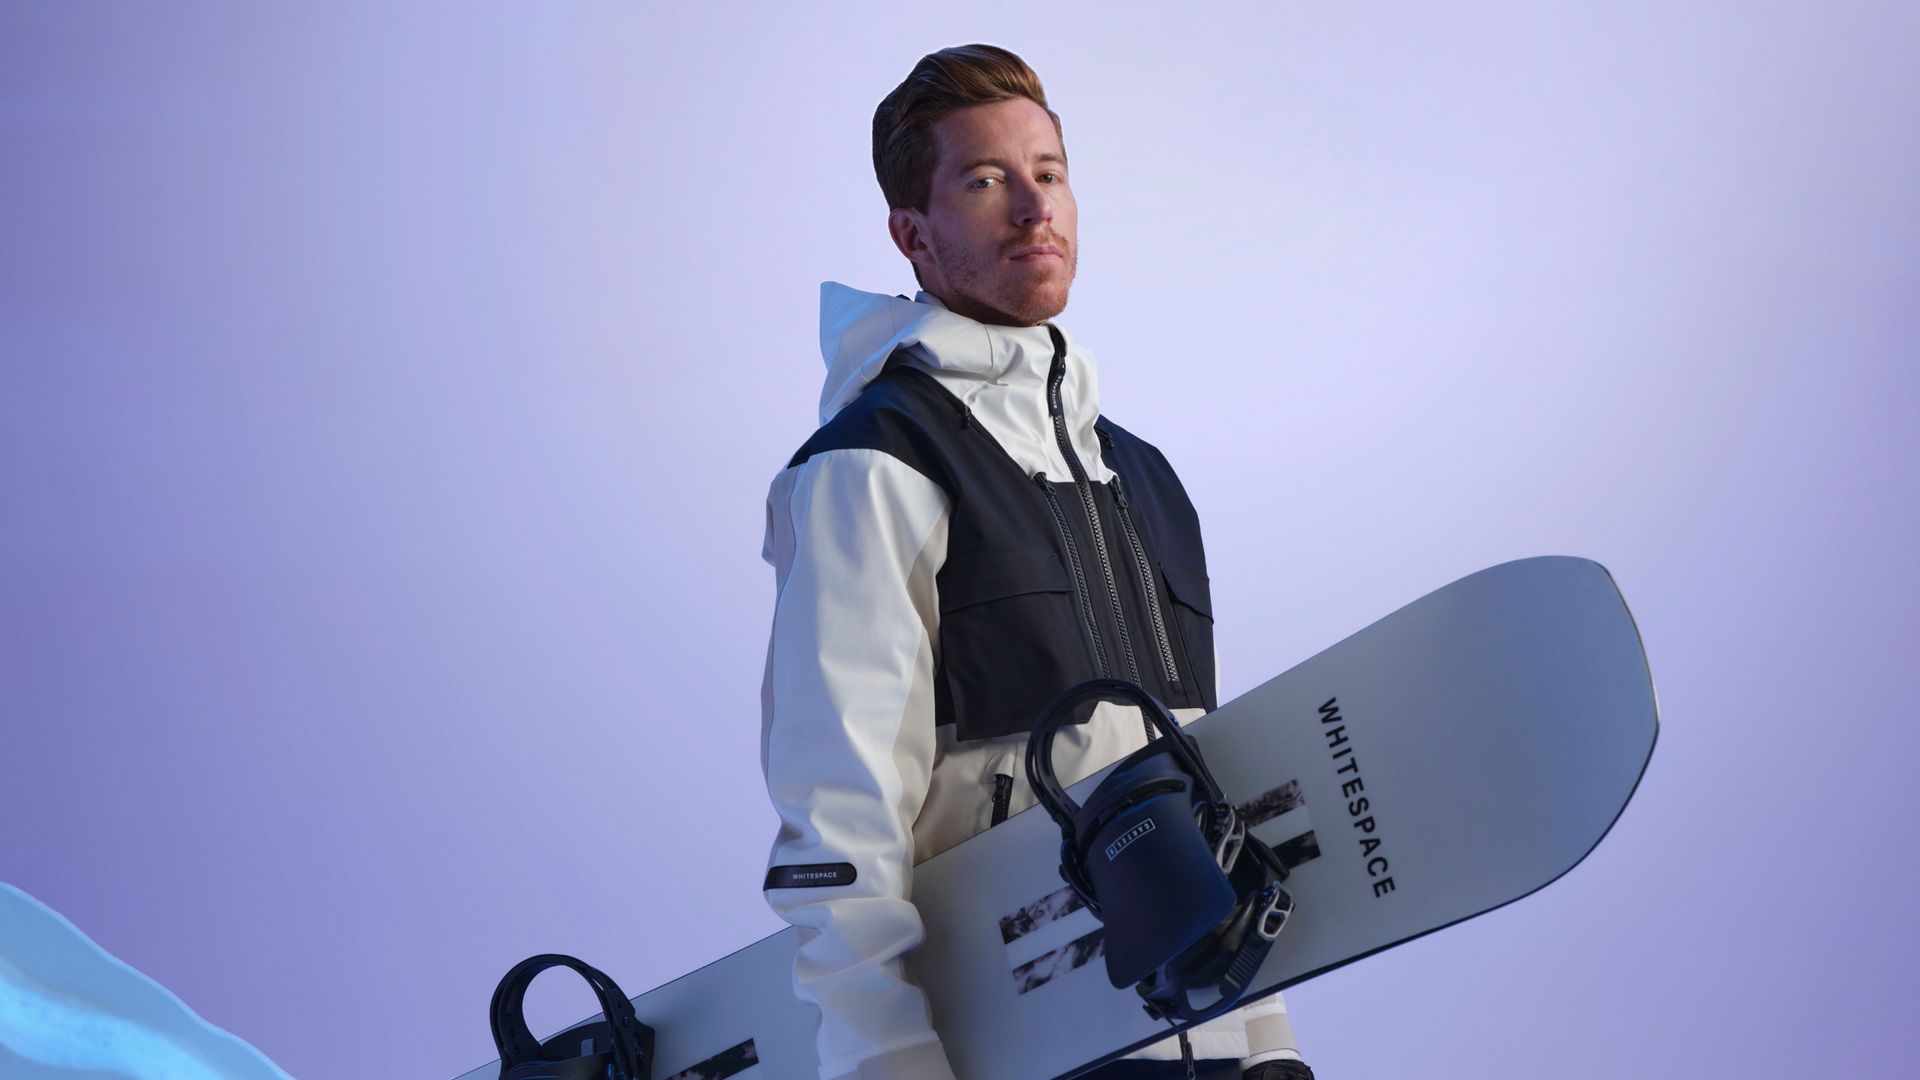 Olympic snowboarder Shaun White is outfitted in Whitespace branded gear.